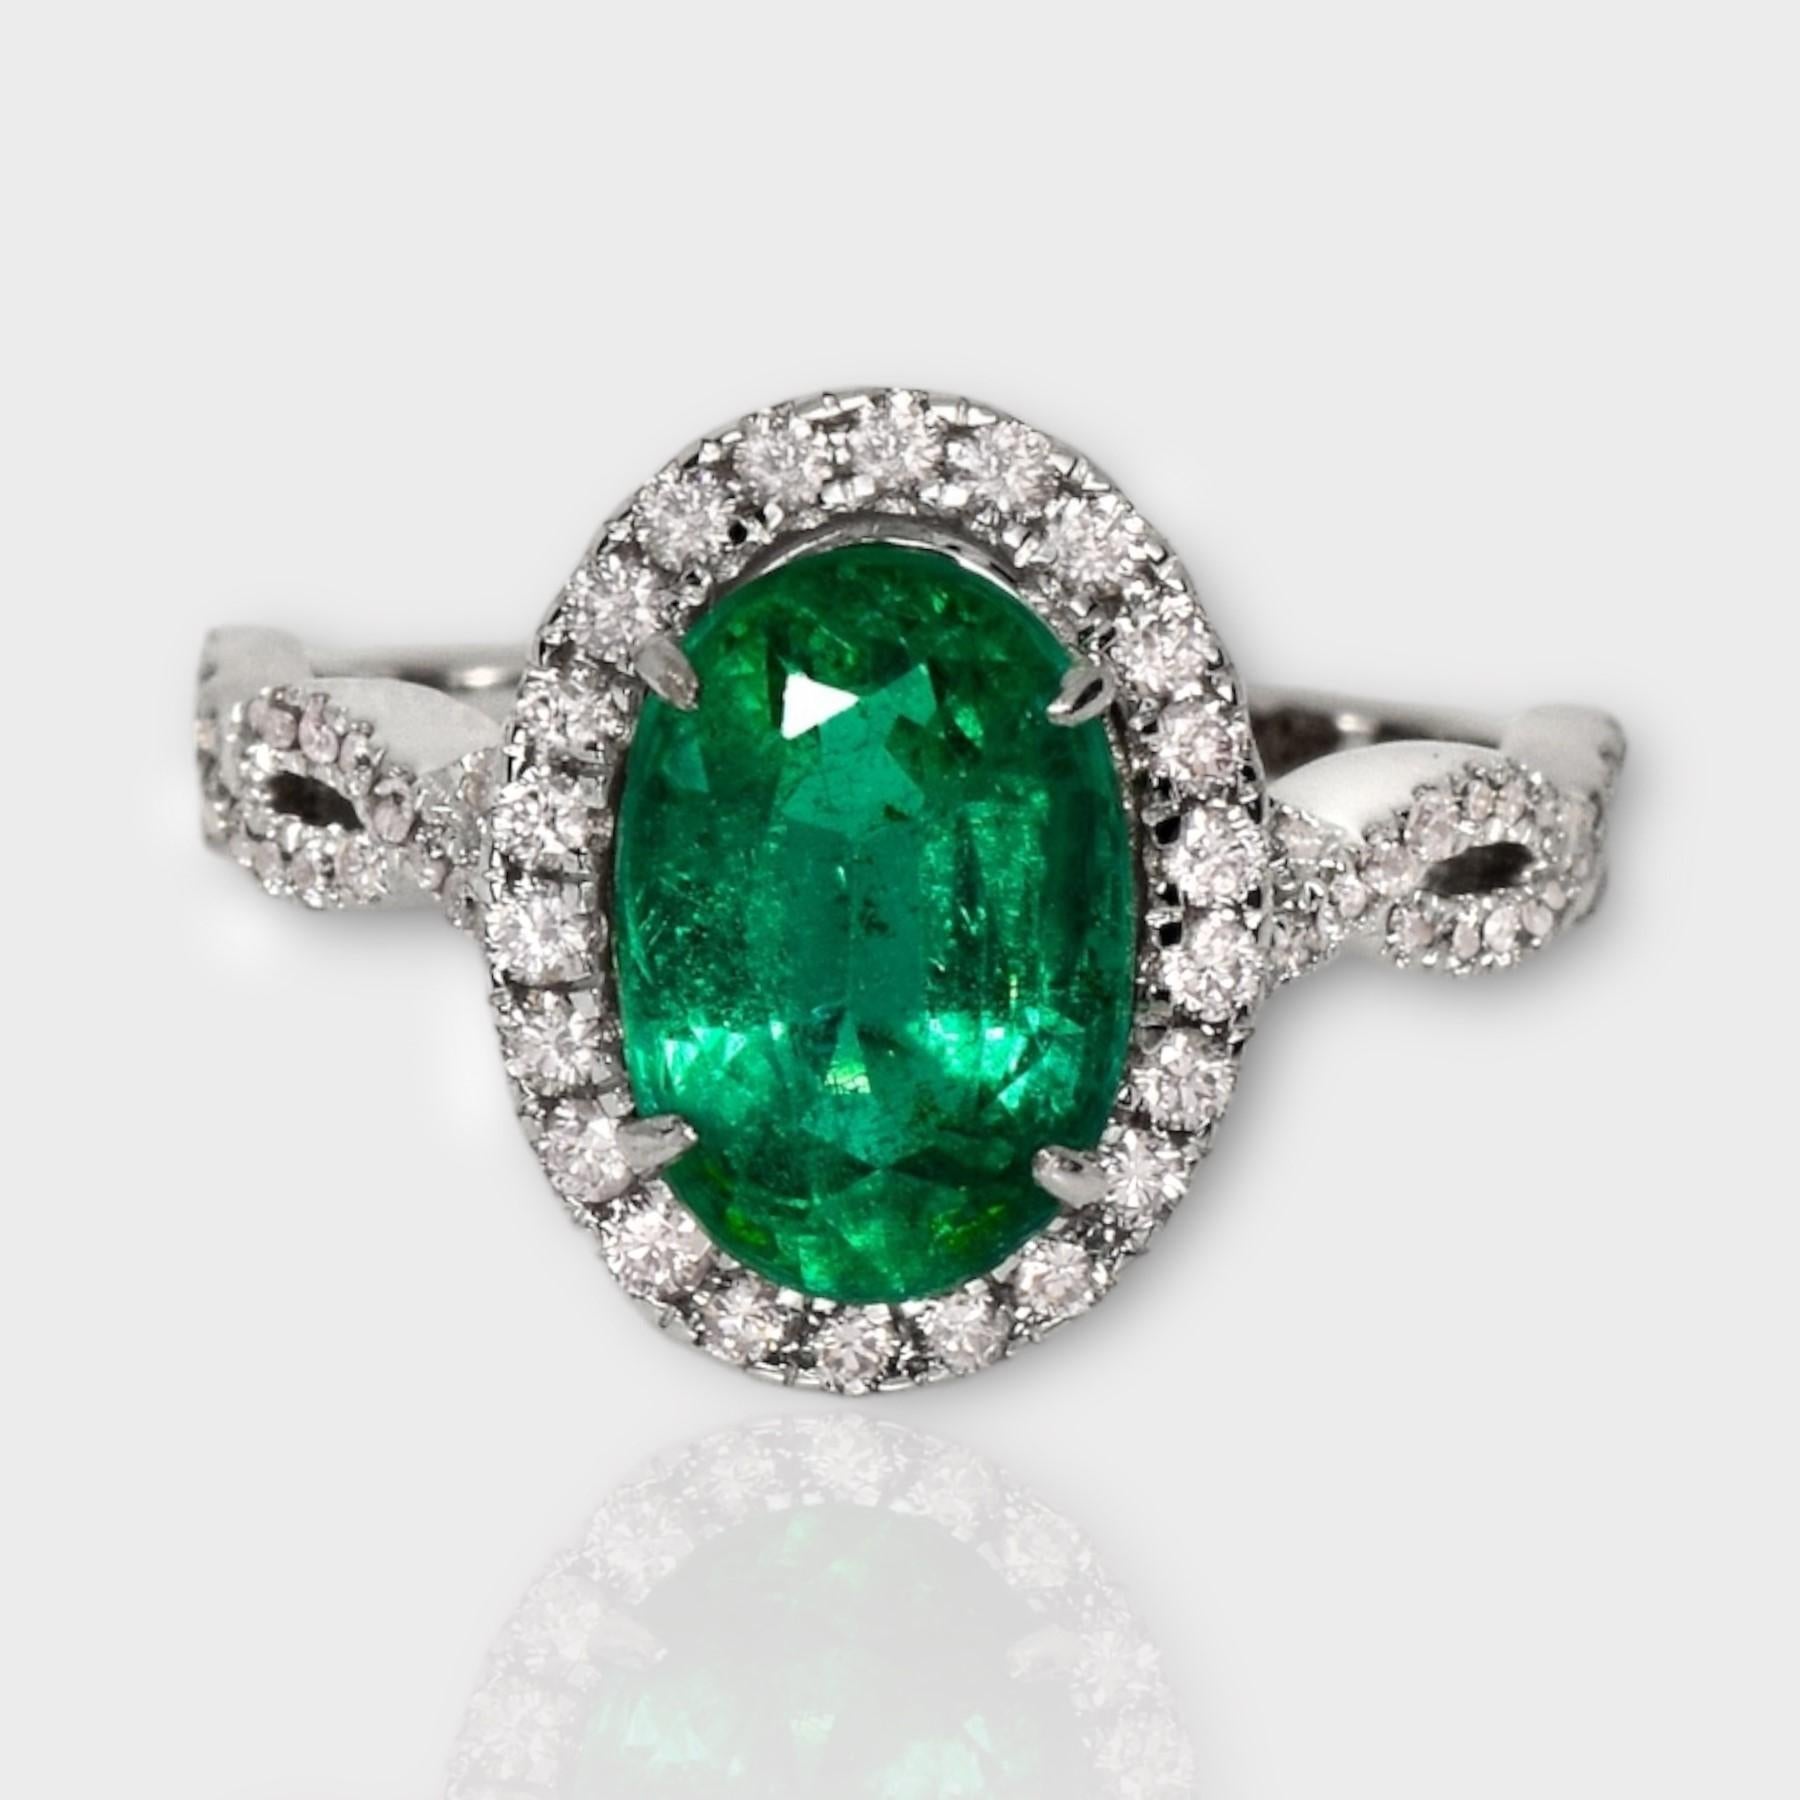 **IGI 18K White Gold 2.67 ct Emerald&Pink Diamonds Antique Art Deco Style Engagement Ring** 

An IGI-certified natural Zambia green emerald weighing 2.67 ct is set on an 18K white gold arc deco design band with natural pink diamonds weighing 0.44